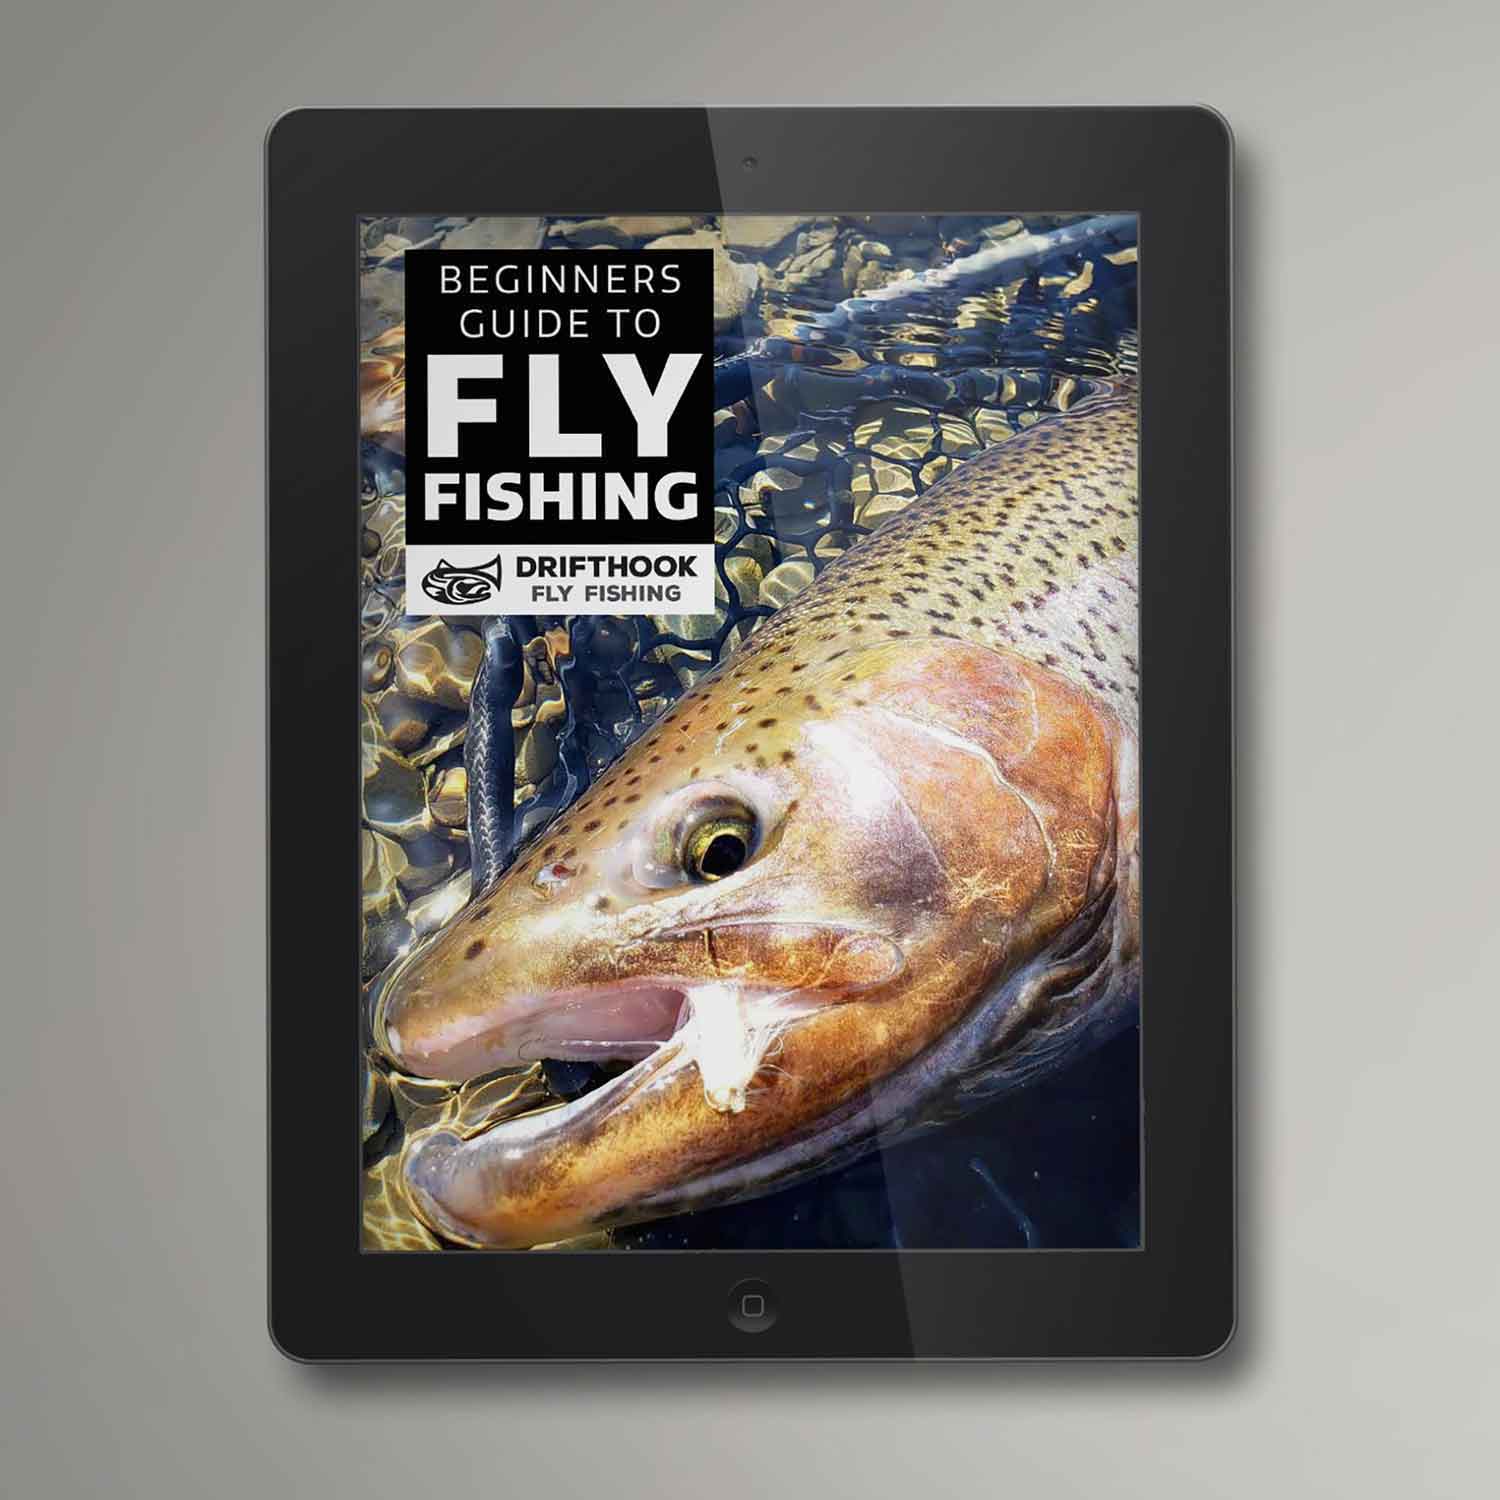 Beginners Guide to Fly Fishing Drifhook Ebook